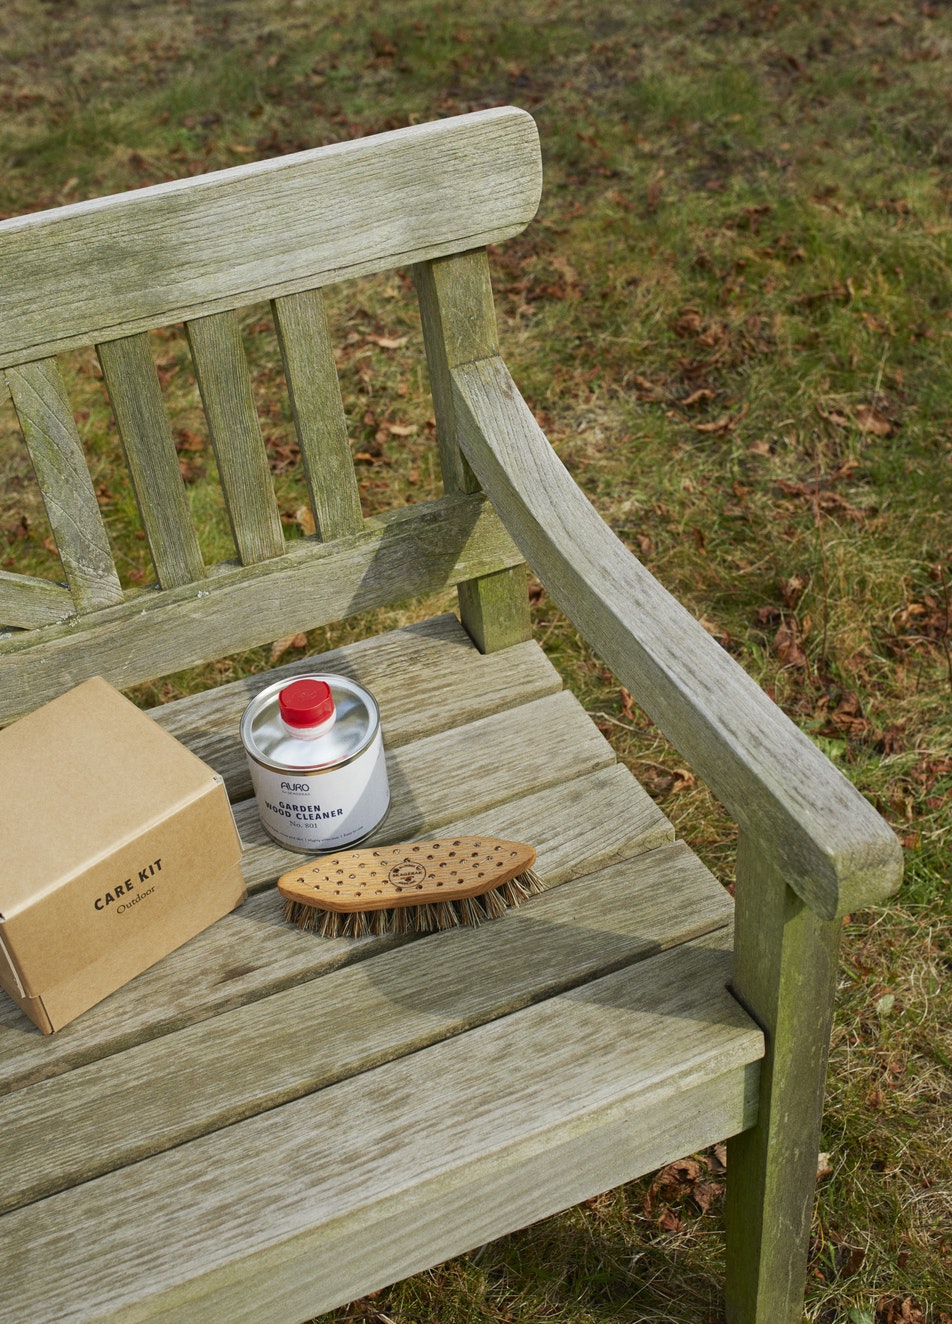 Care Kit and bench